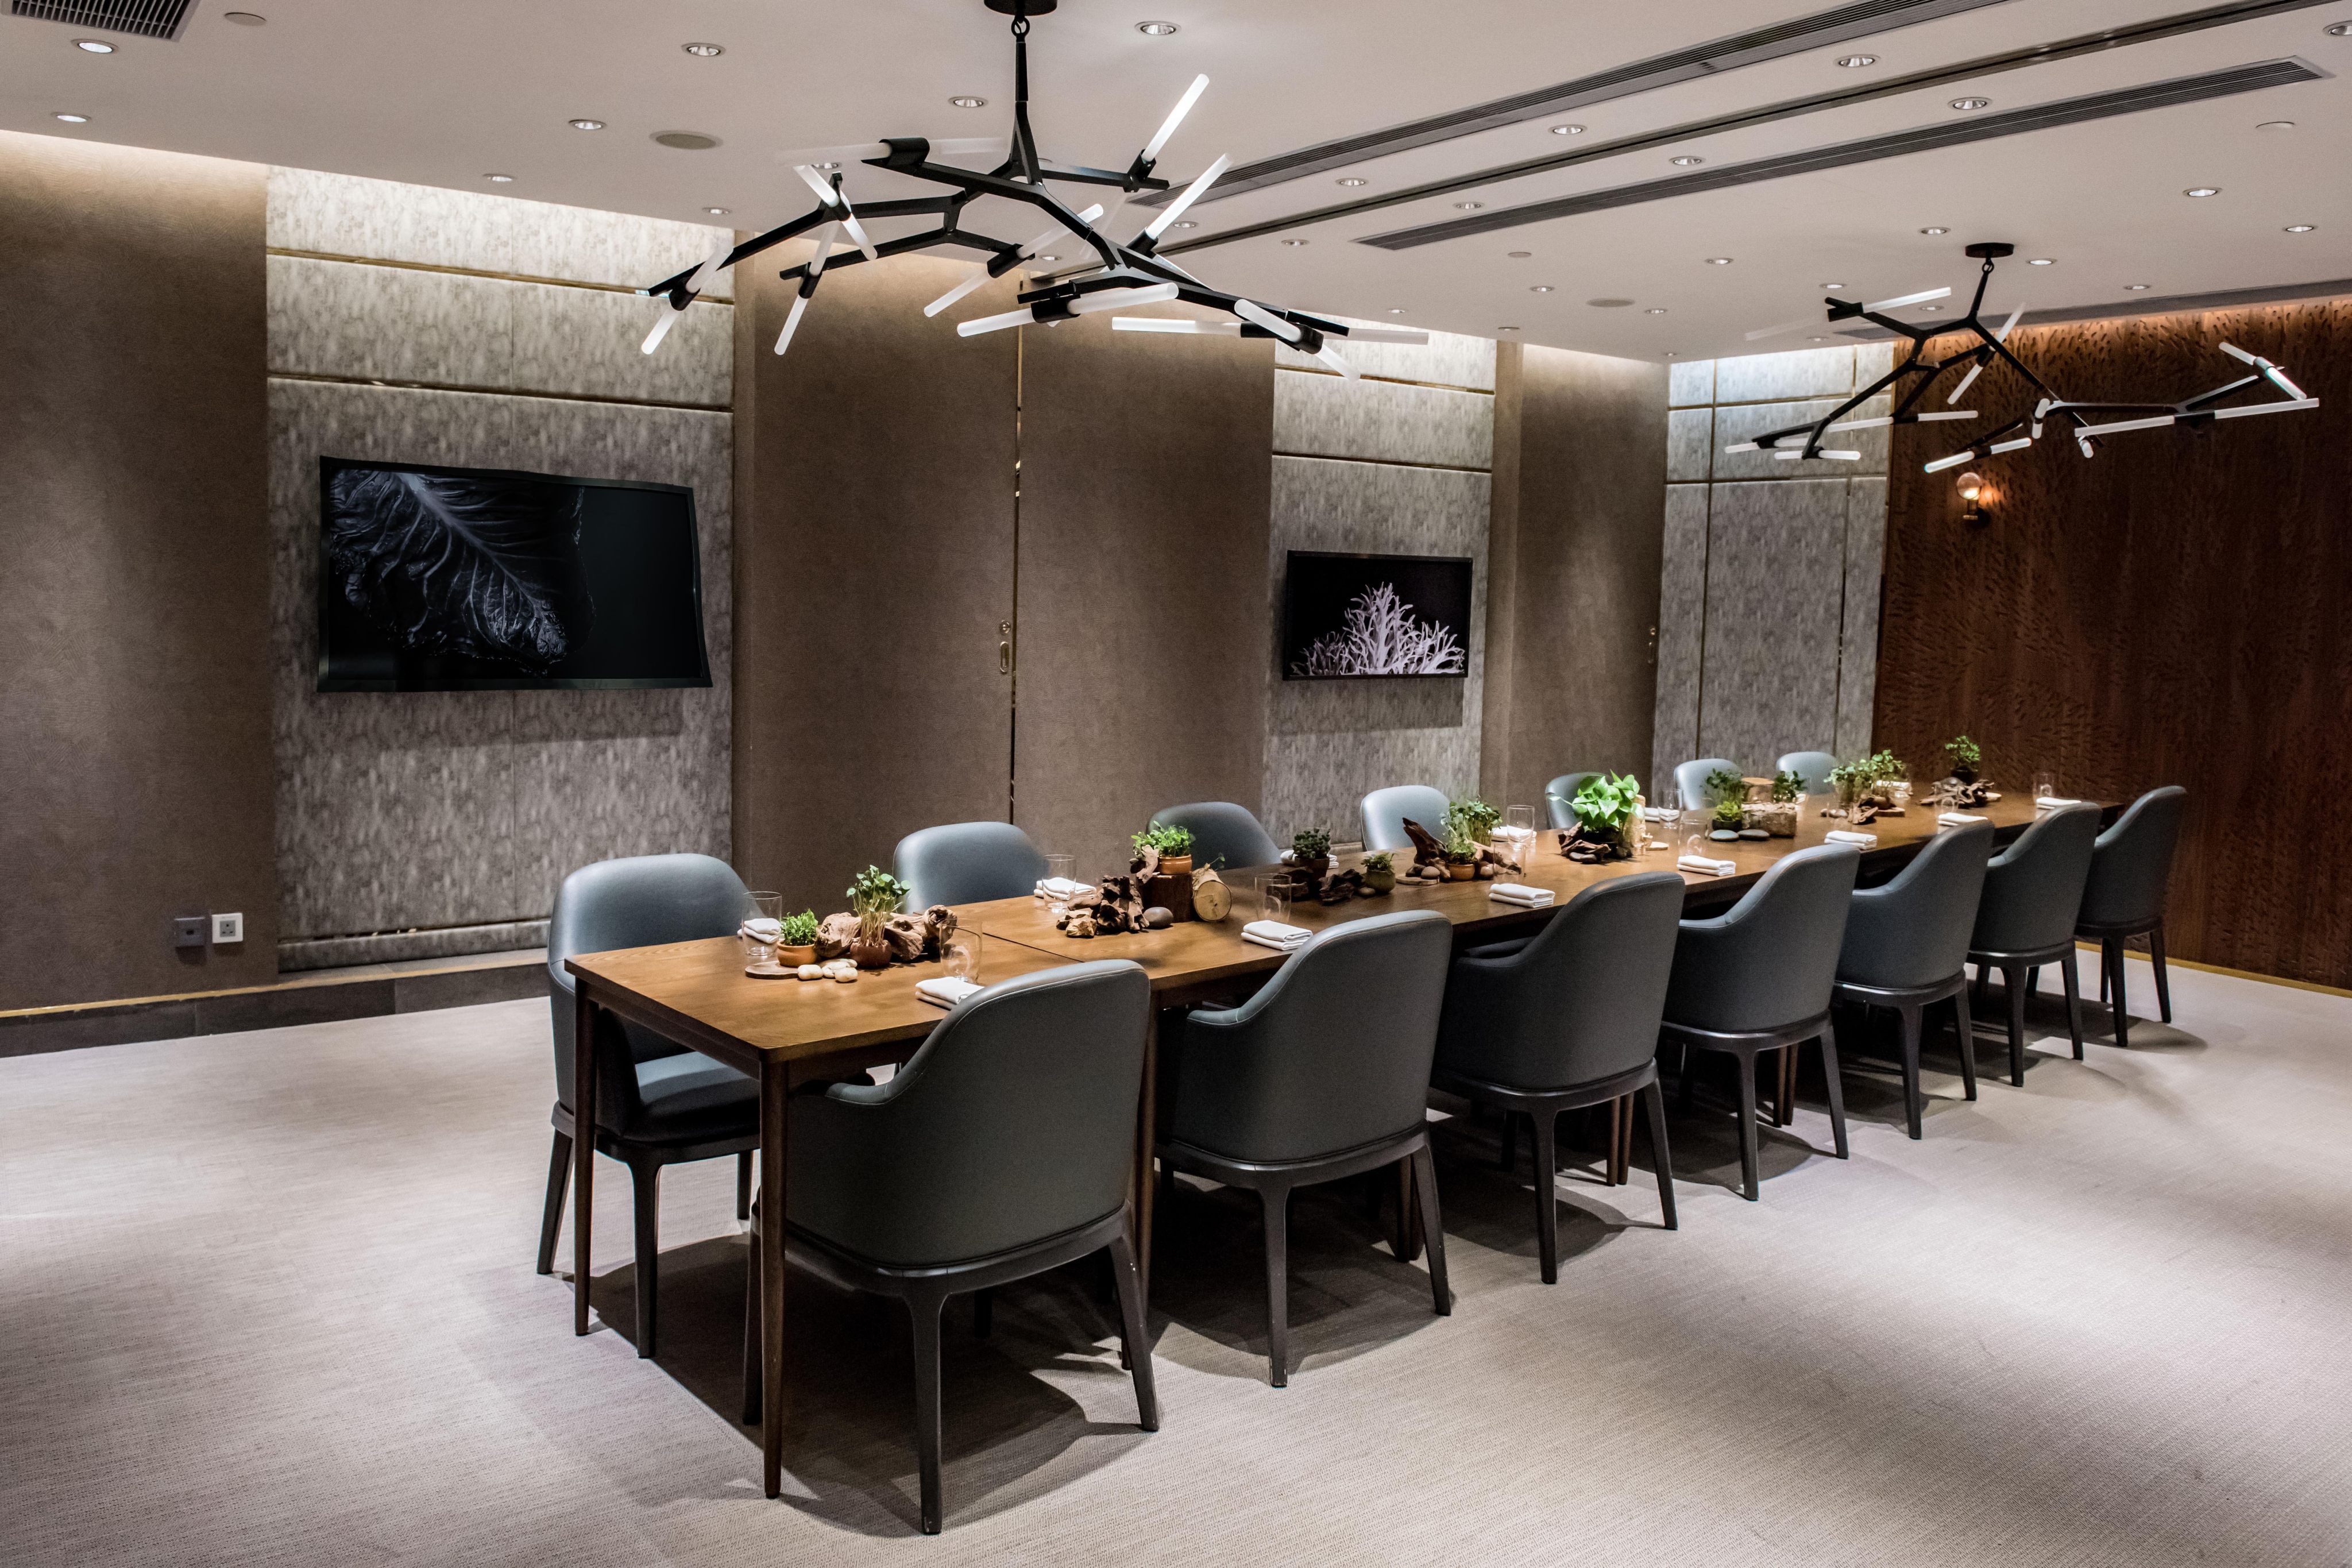 Private dining room at Roganic Hong Kong, Simon Rogan’s local restaurant which has been awarded a Michelin Green Star for sustainability, as well as a regular Michelin star. Photo: Handout